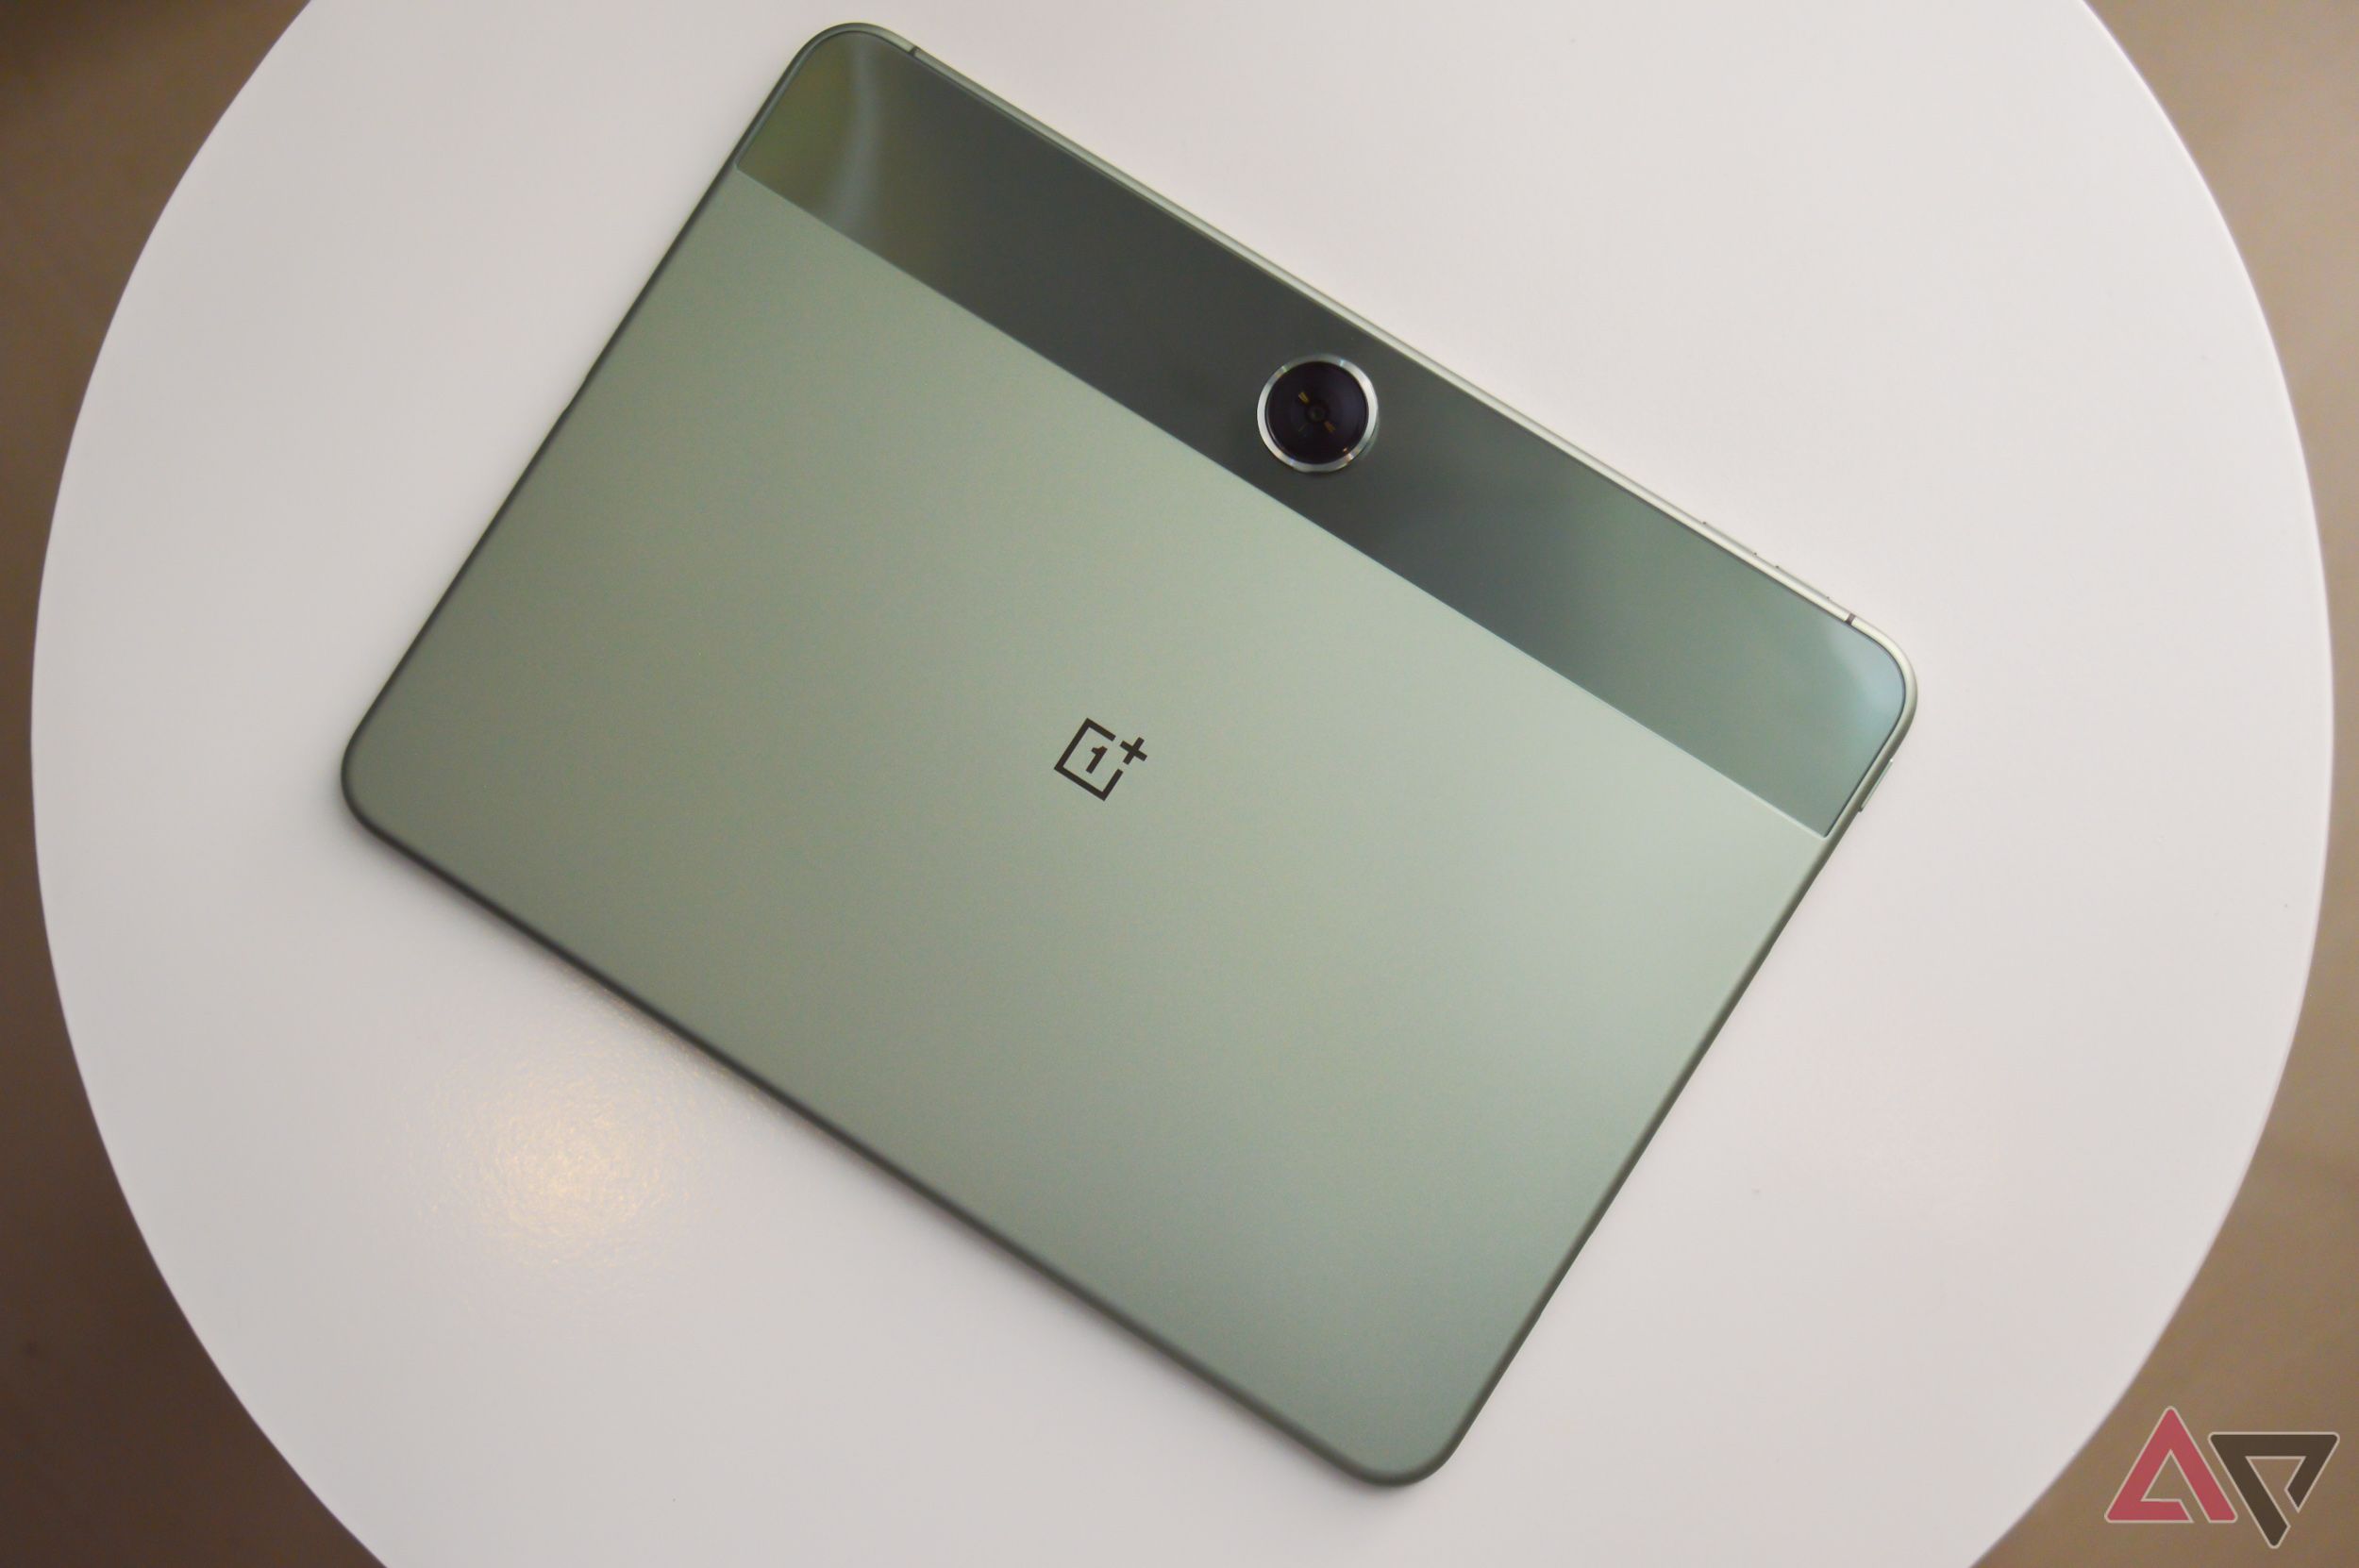 OnePlus Pad Review: Almost Ready For Prime Time